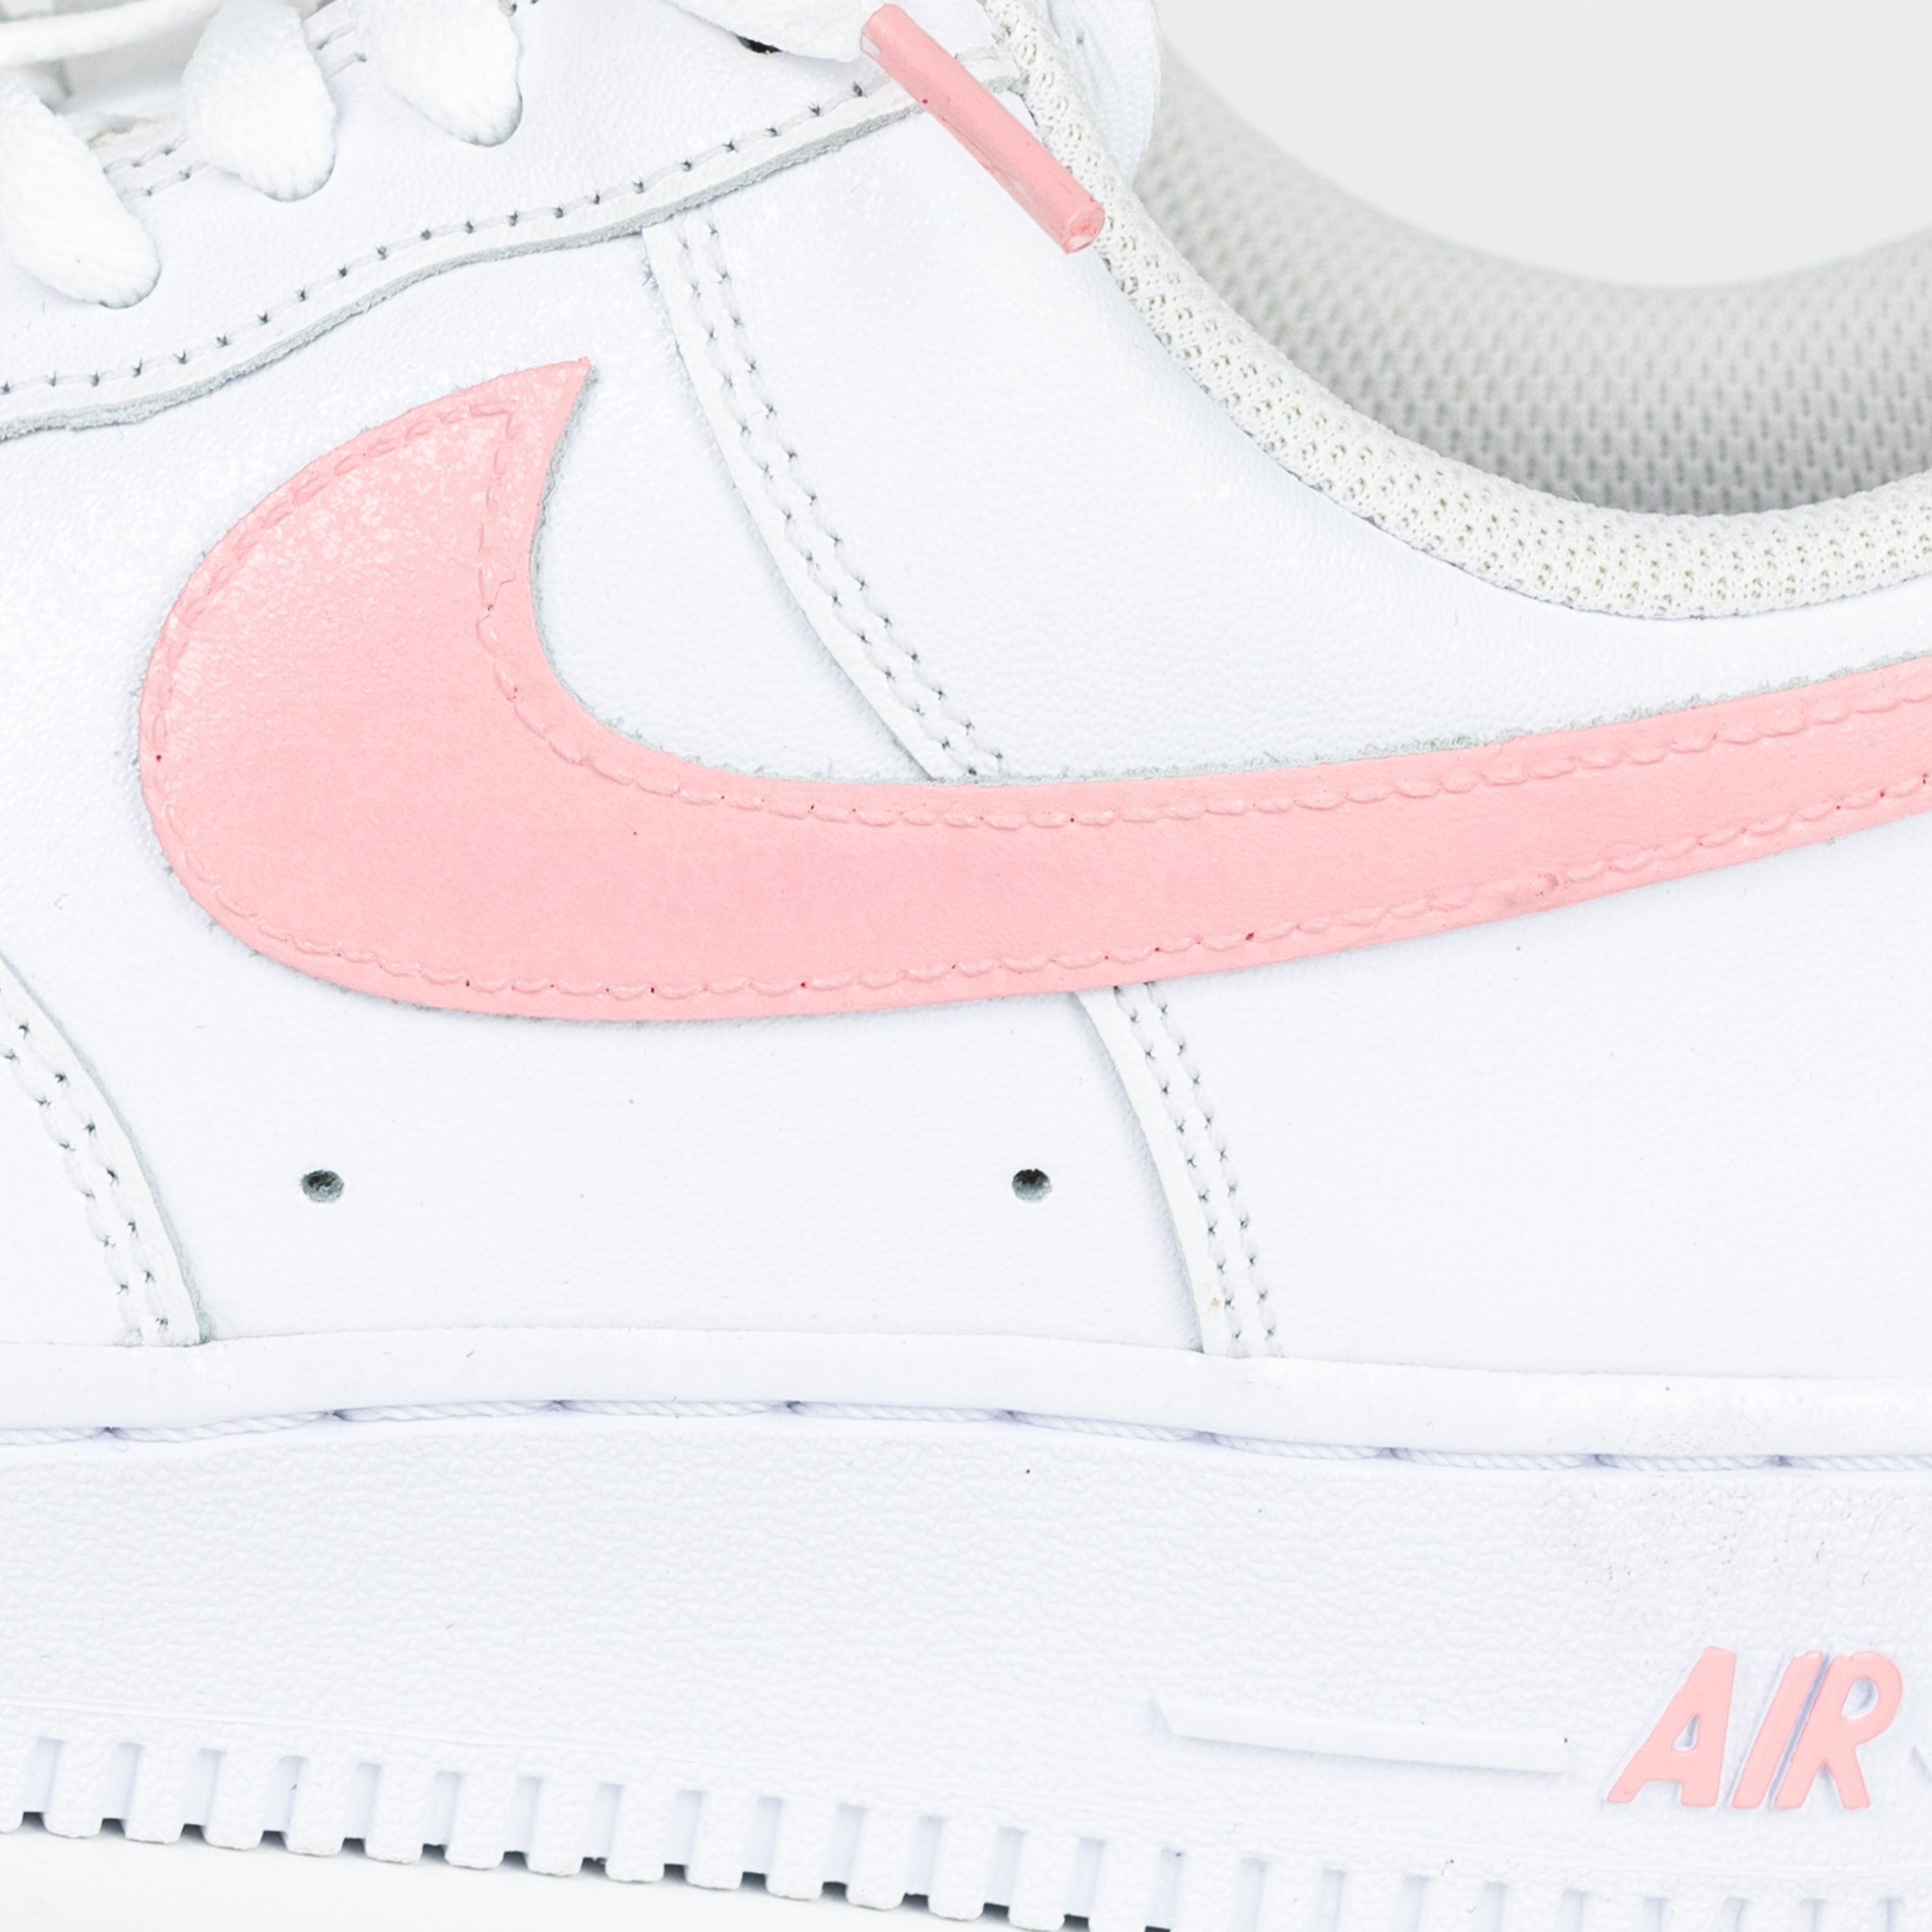 white and light pink air force 1